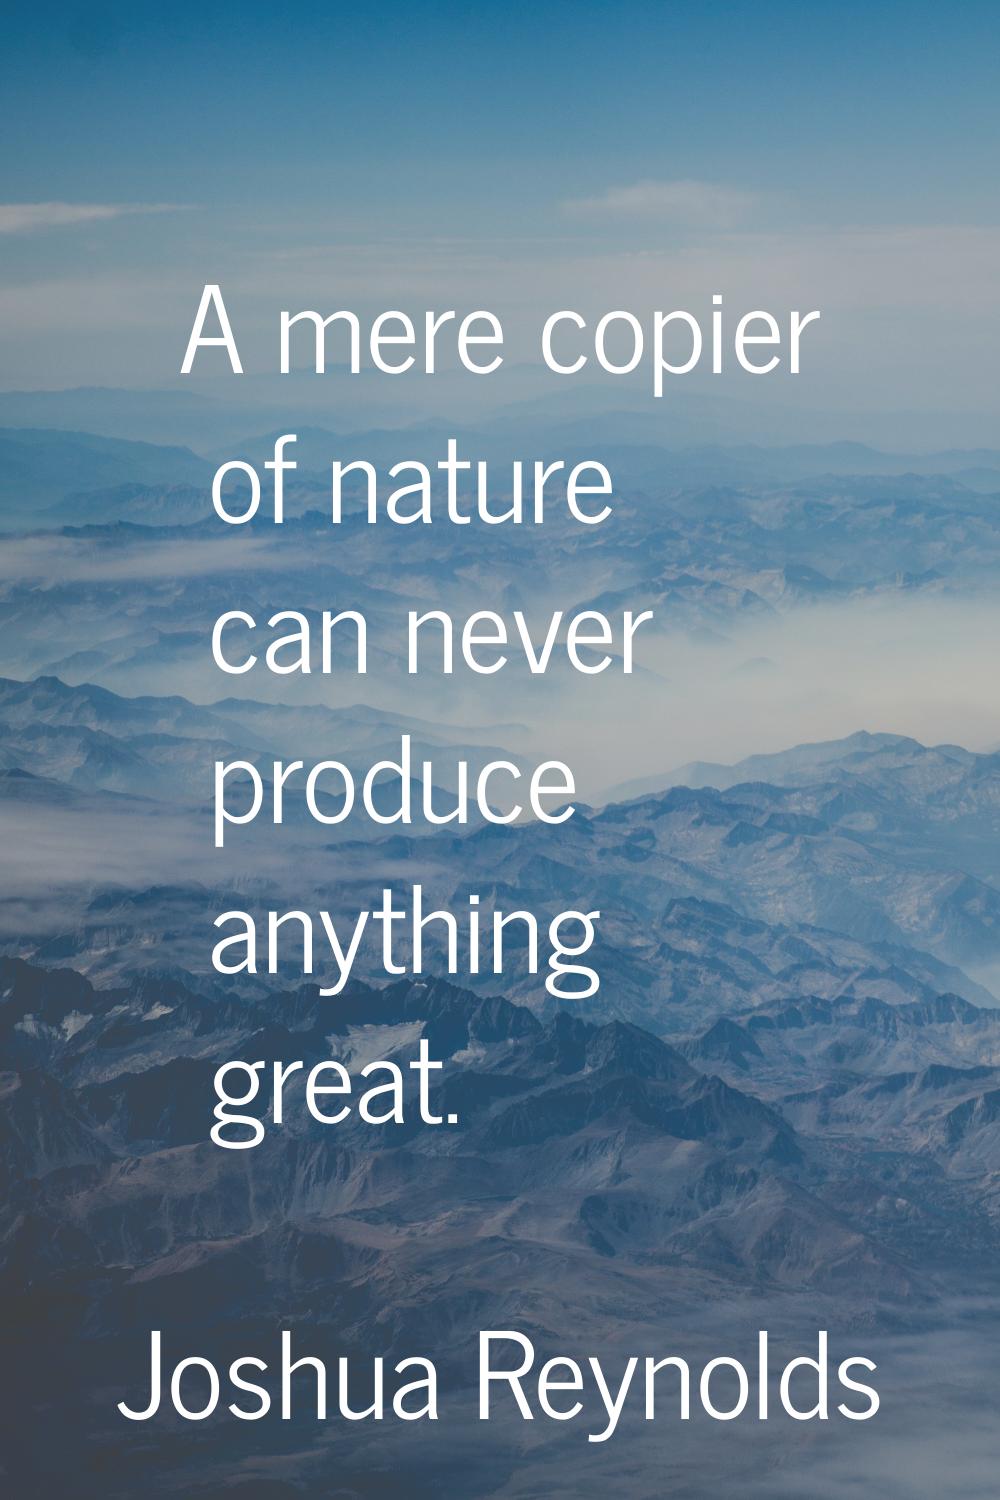 A mere copier of nature can never produce anything great.